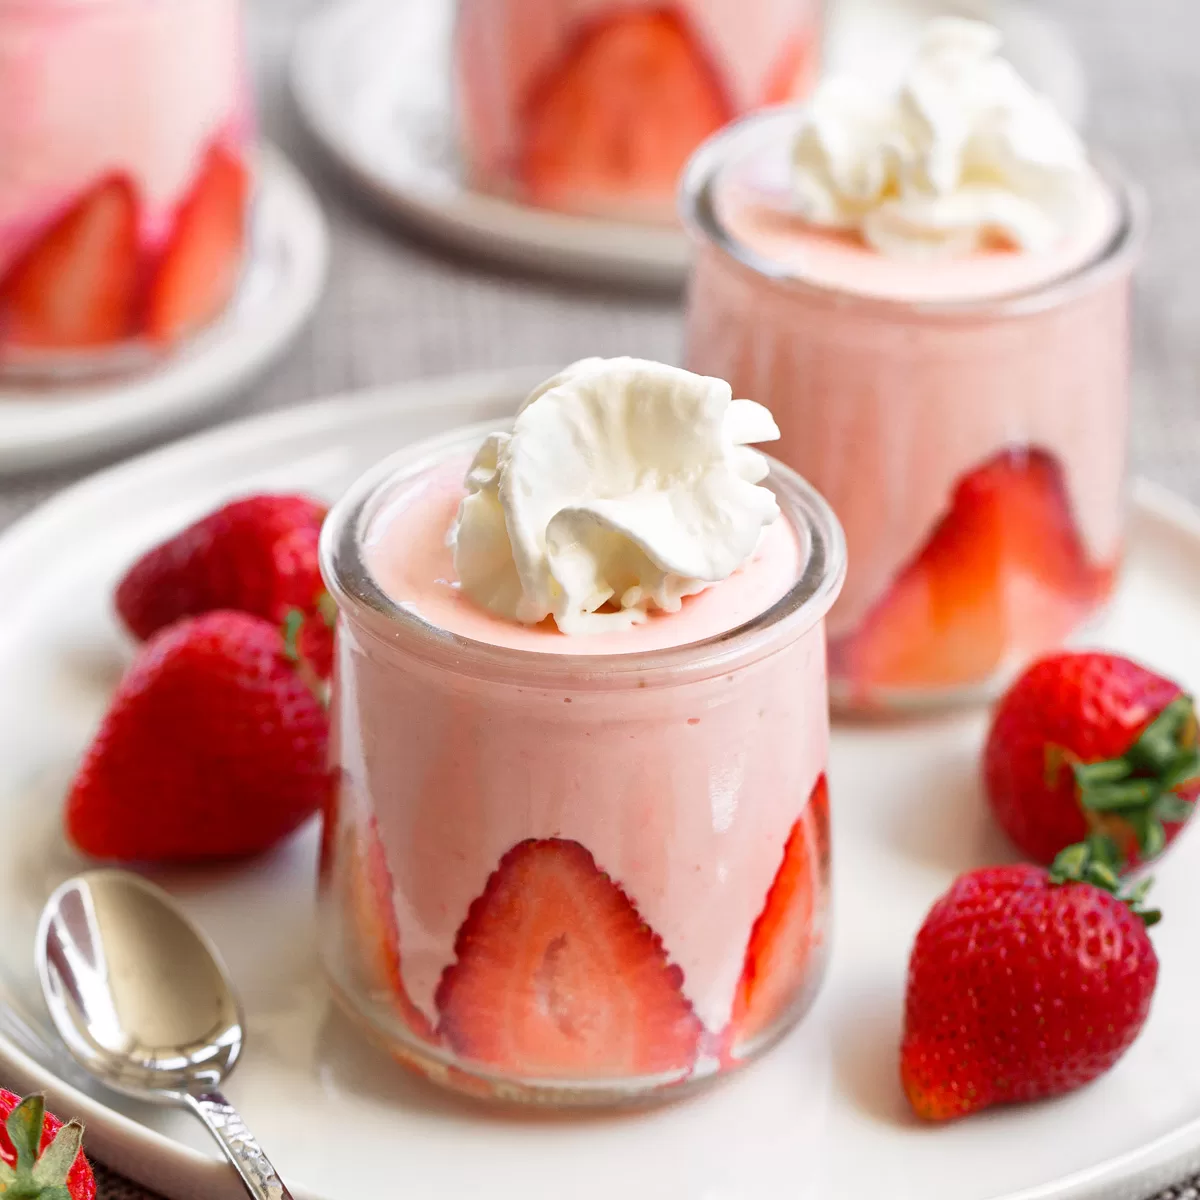 Strawberry Mousse Recipe – Mild, Whipped, and so Scrumptious!